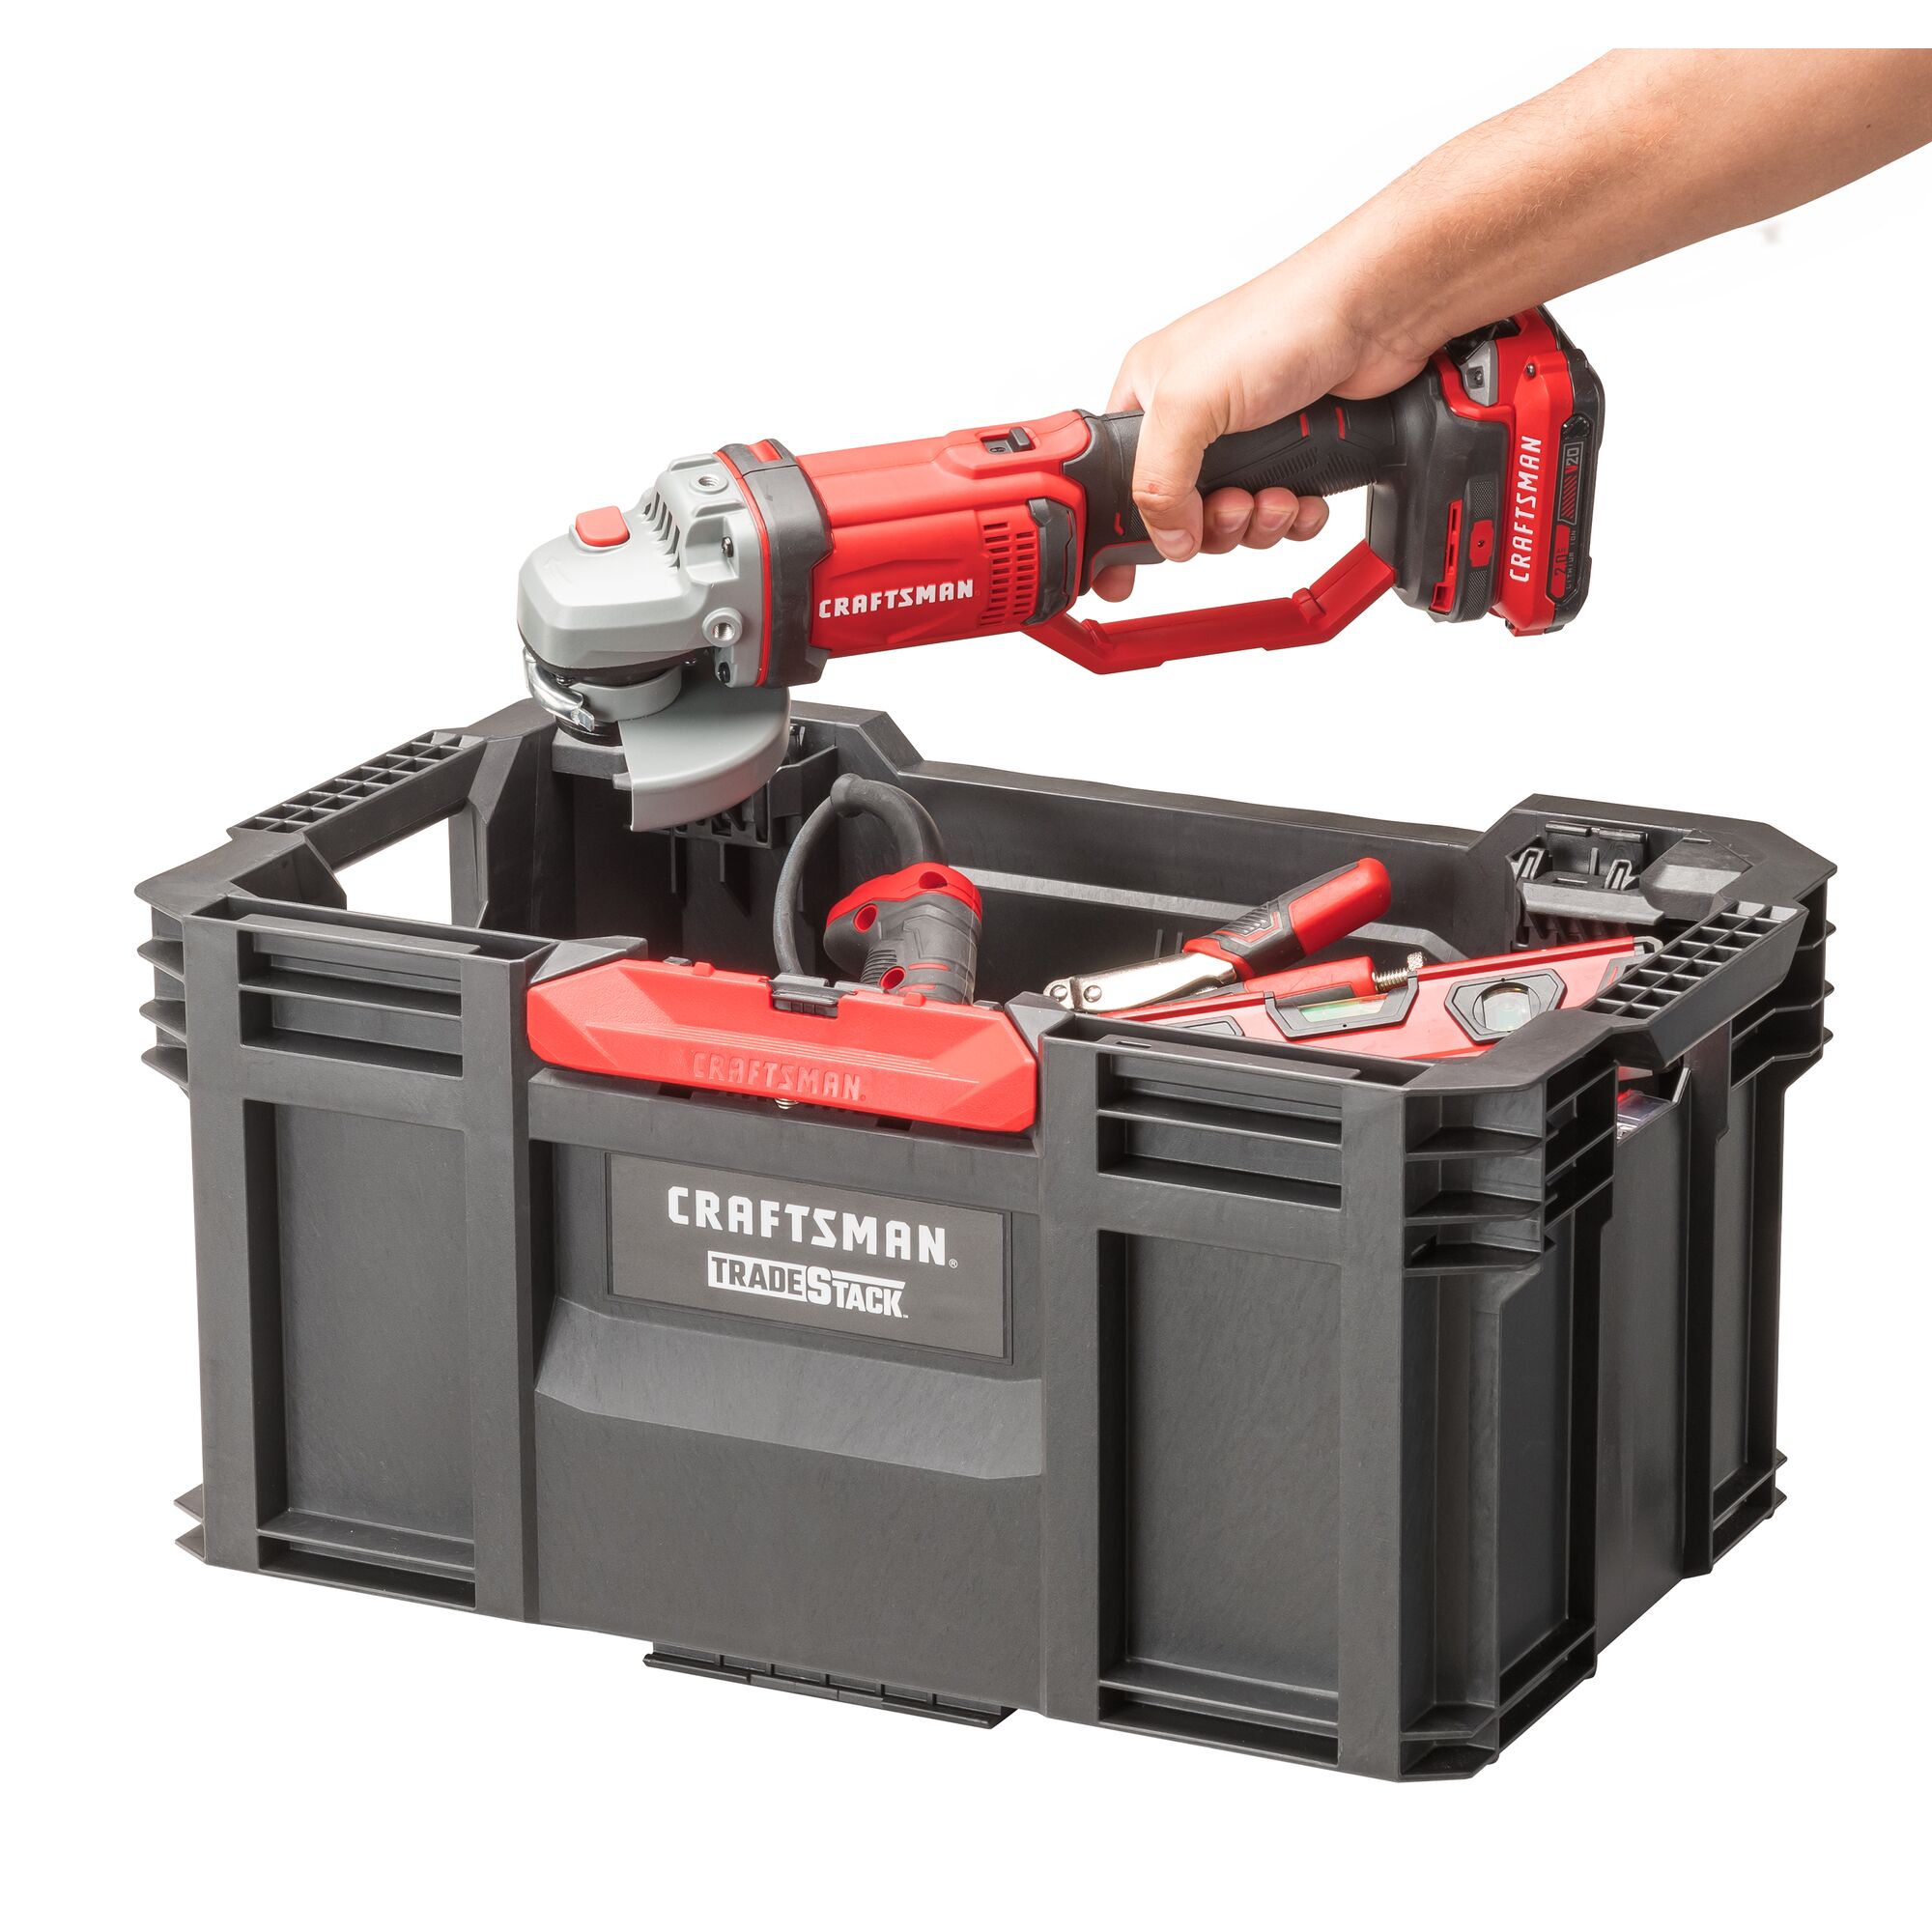 Hand placing CRAFTSMAN Angle Grinder into a CRAFTSMAN TRADESTACK Tool Crate, to join other assorted CRAFTSMAN hand tools and power tools